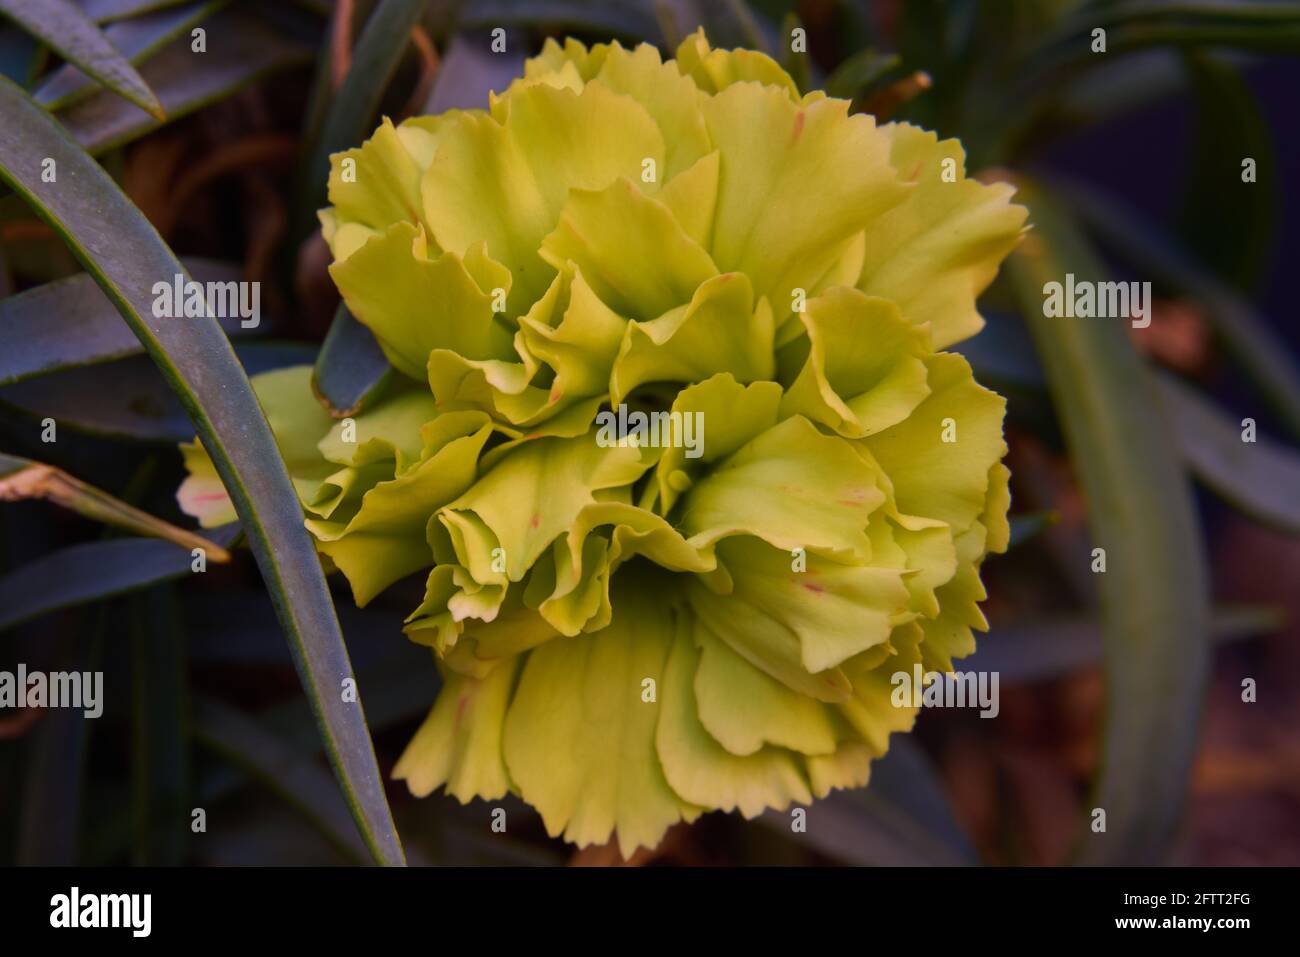 Yellow carnation or carnation flower, Dianthus caryophyllus, in early ...